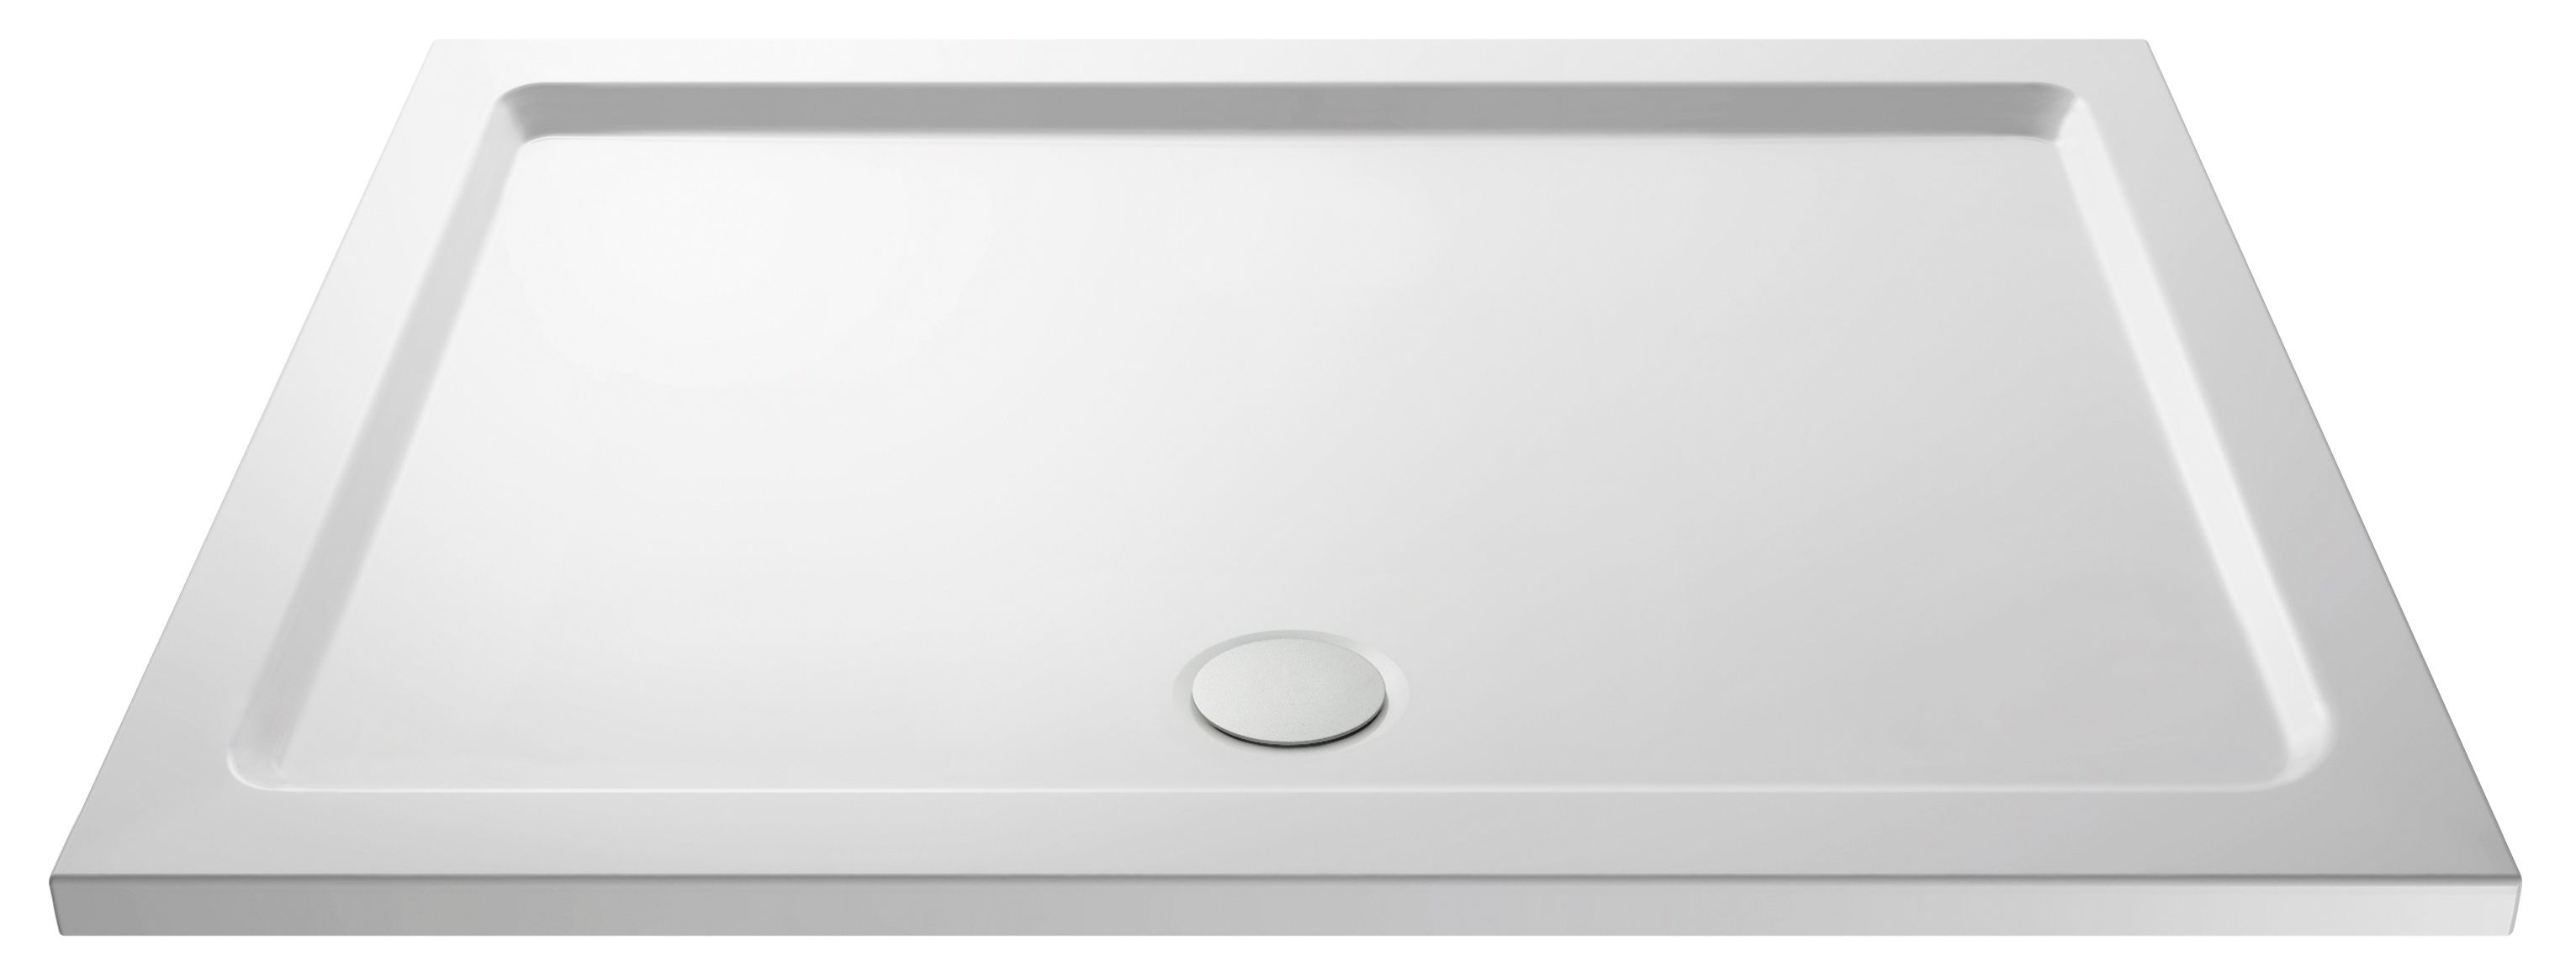 Nuie Shower Tray Pearlstone Rectangular 1500mm x 760mm - White - NTP042 